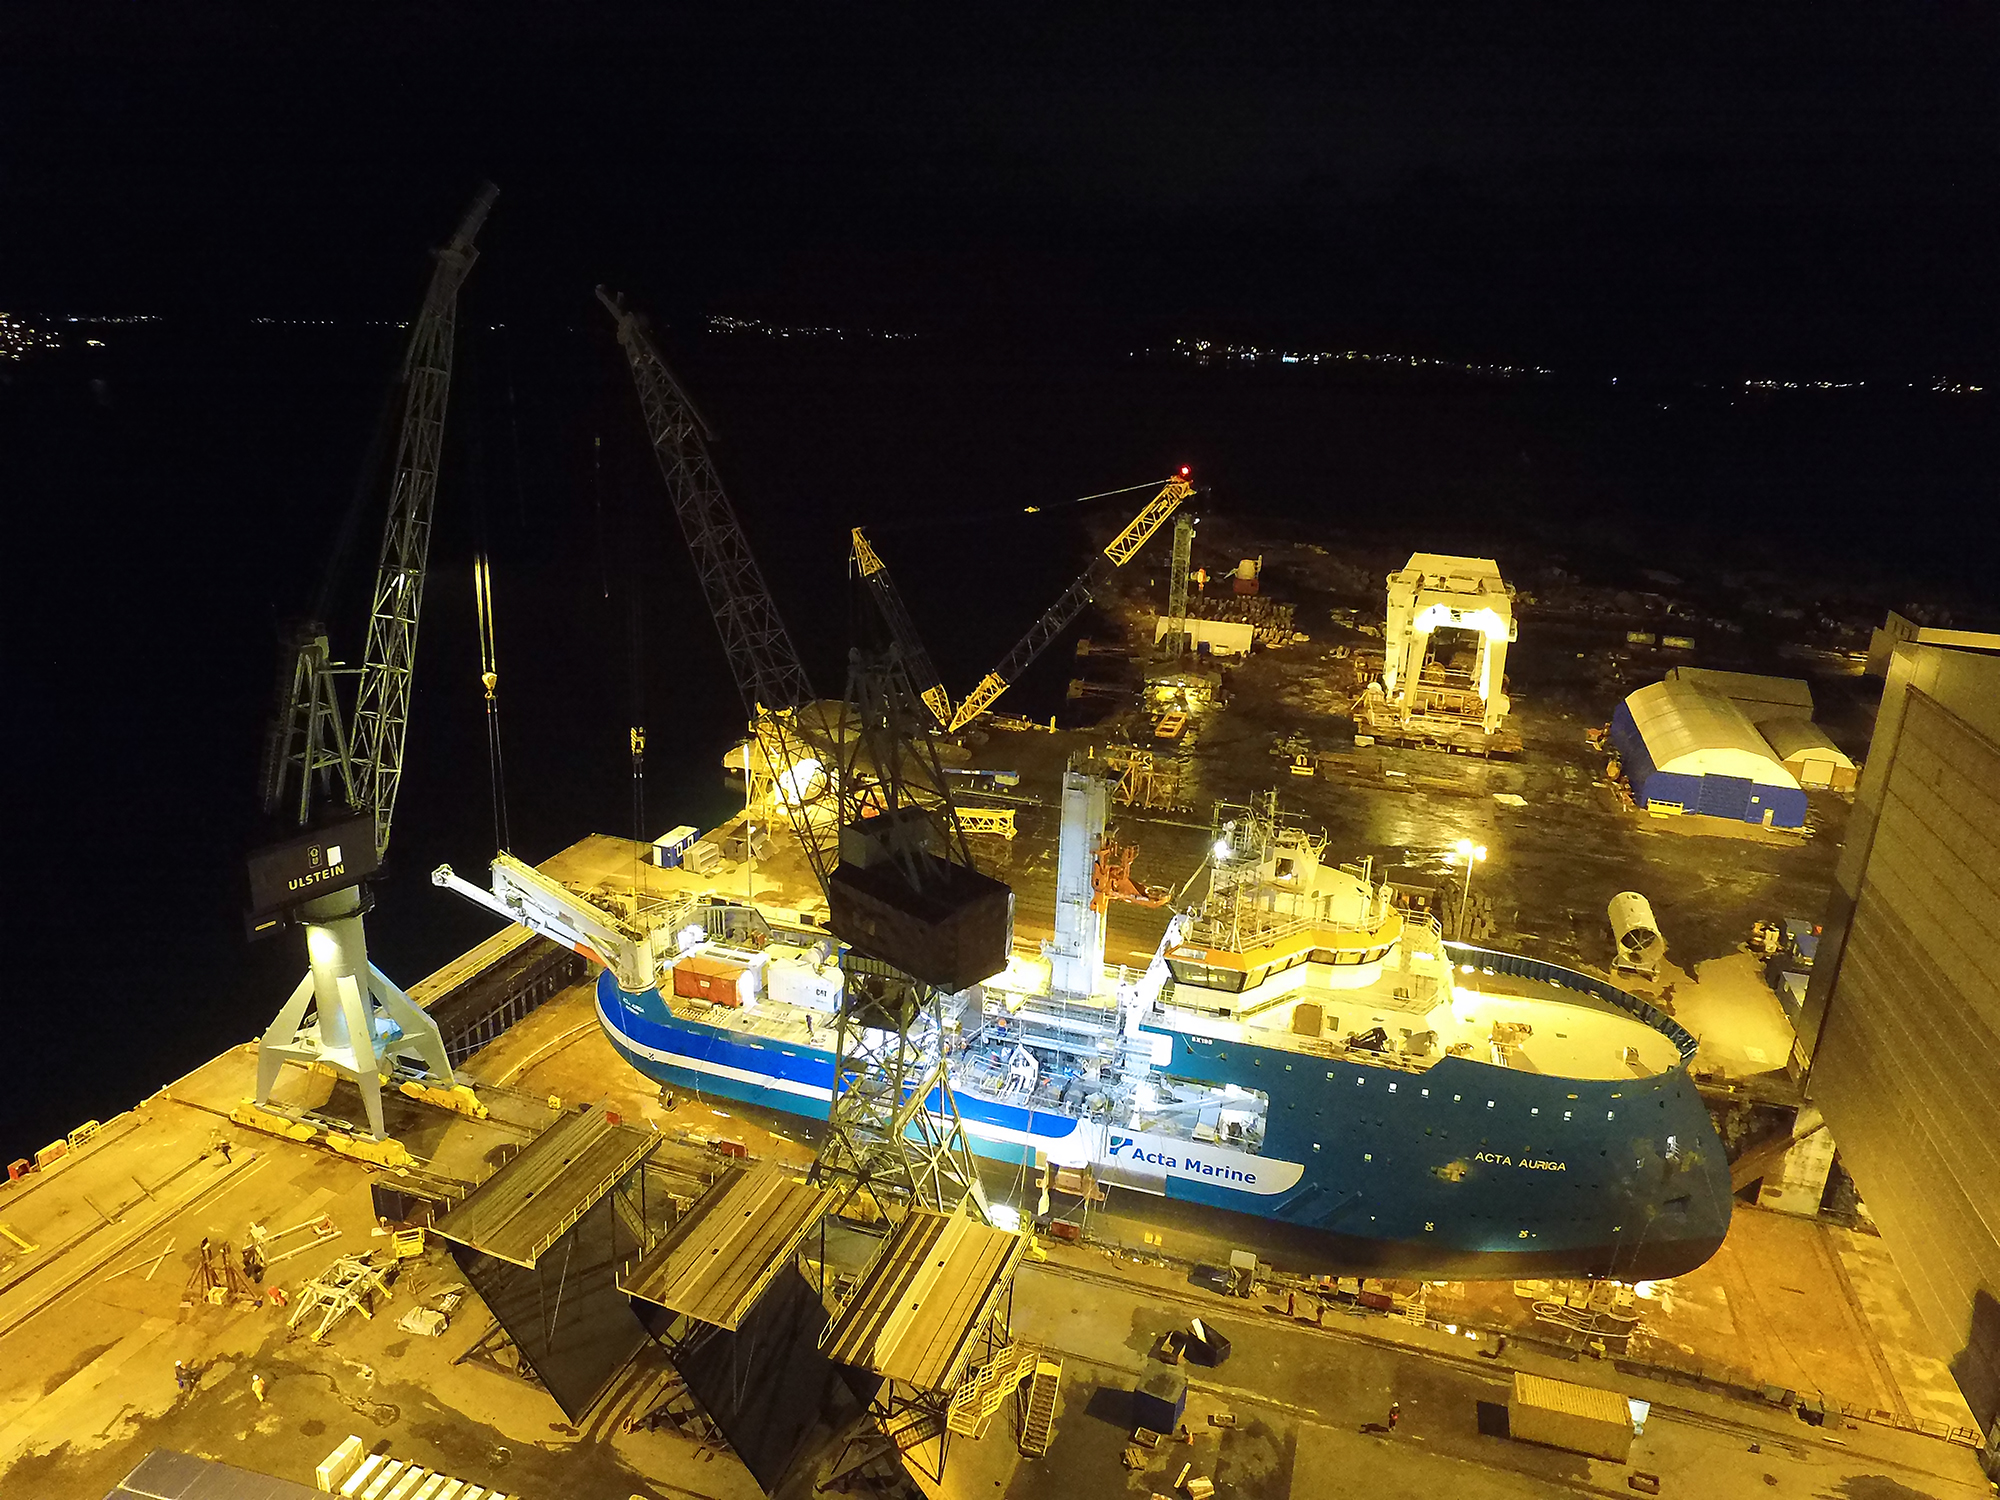 The SMST crane and tower being installed on the Acta Auriga. (Photo: Benny Banen, Acta Marine)